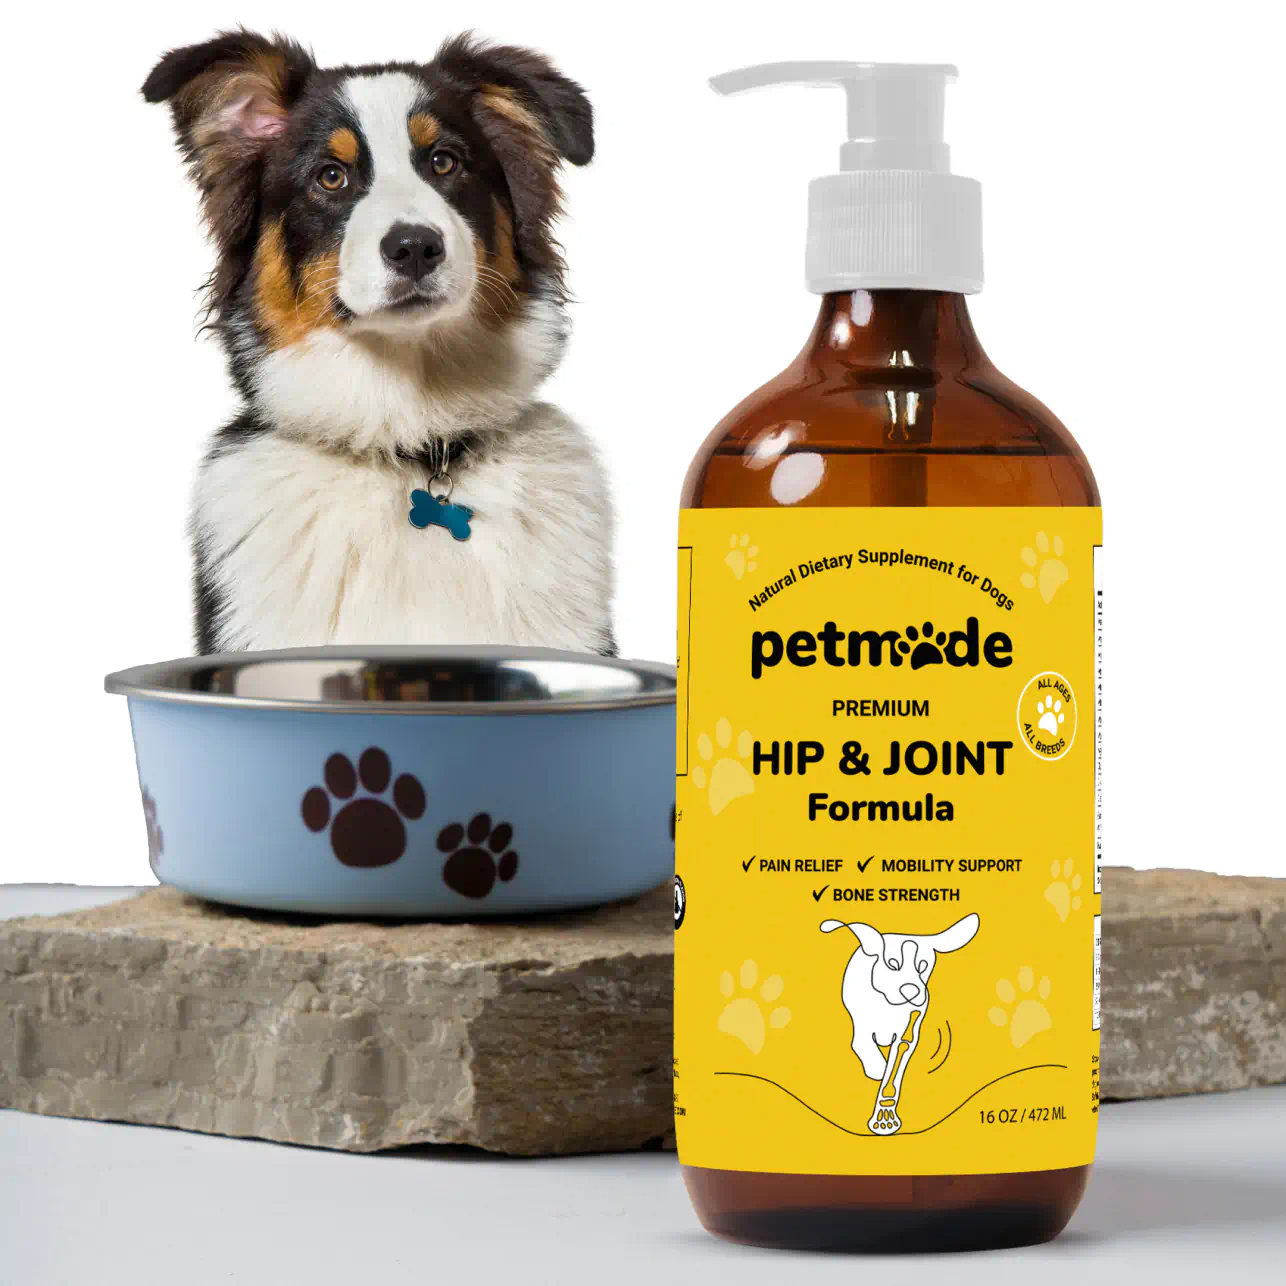 A bottle of Hip & Joint Formula with a pump dispenser, beside a dog sitting next to a bowl